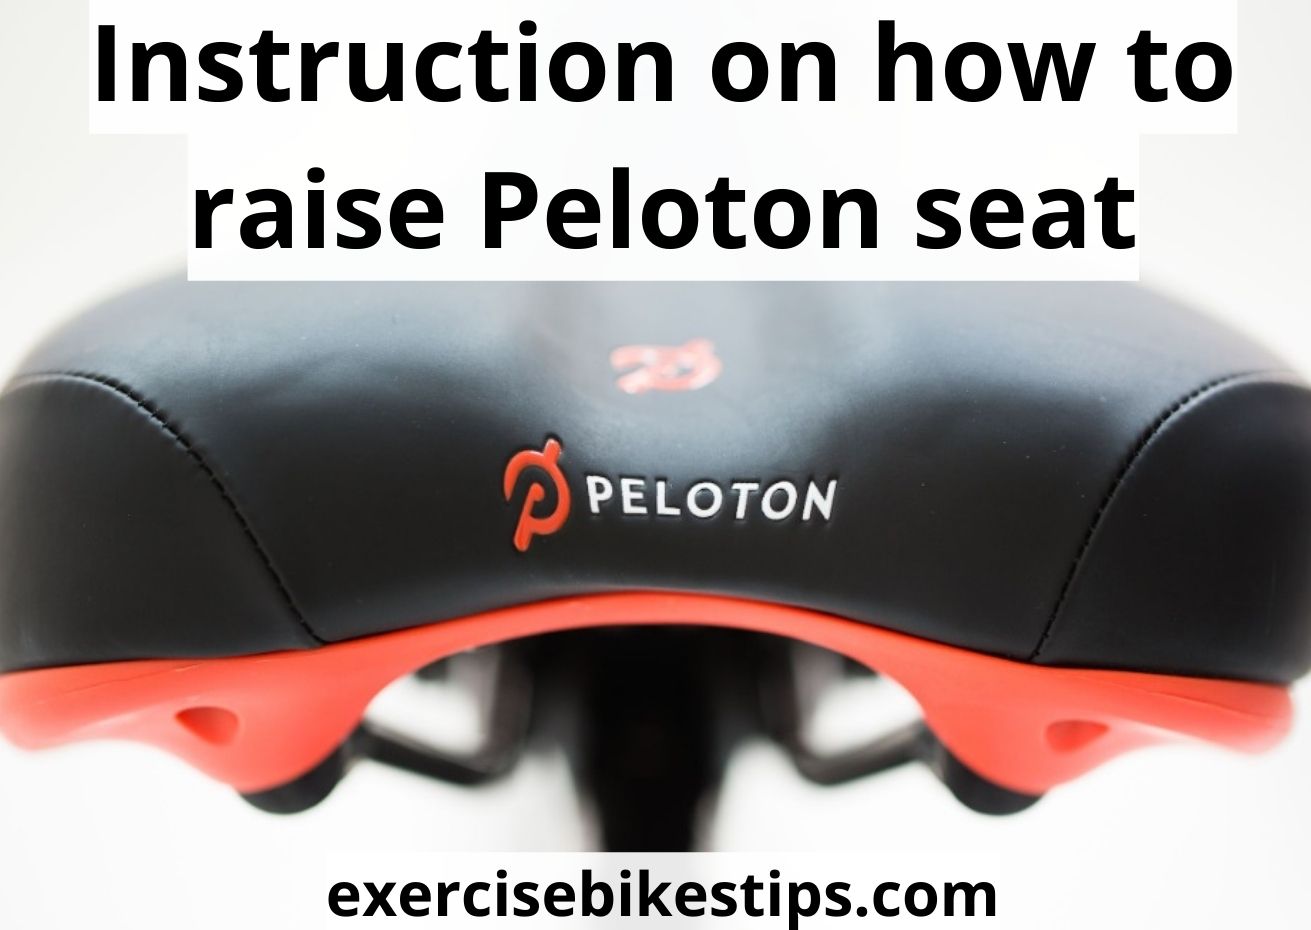 How to raise Peloton seat in 7 steps: the best guide